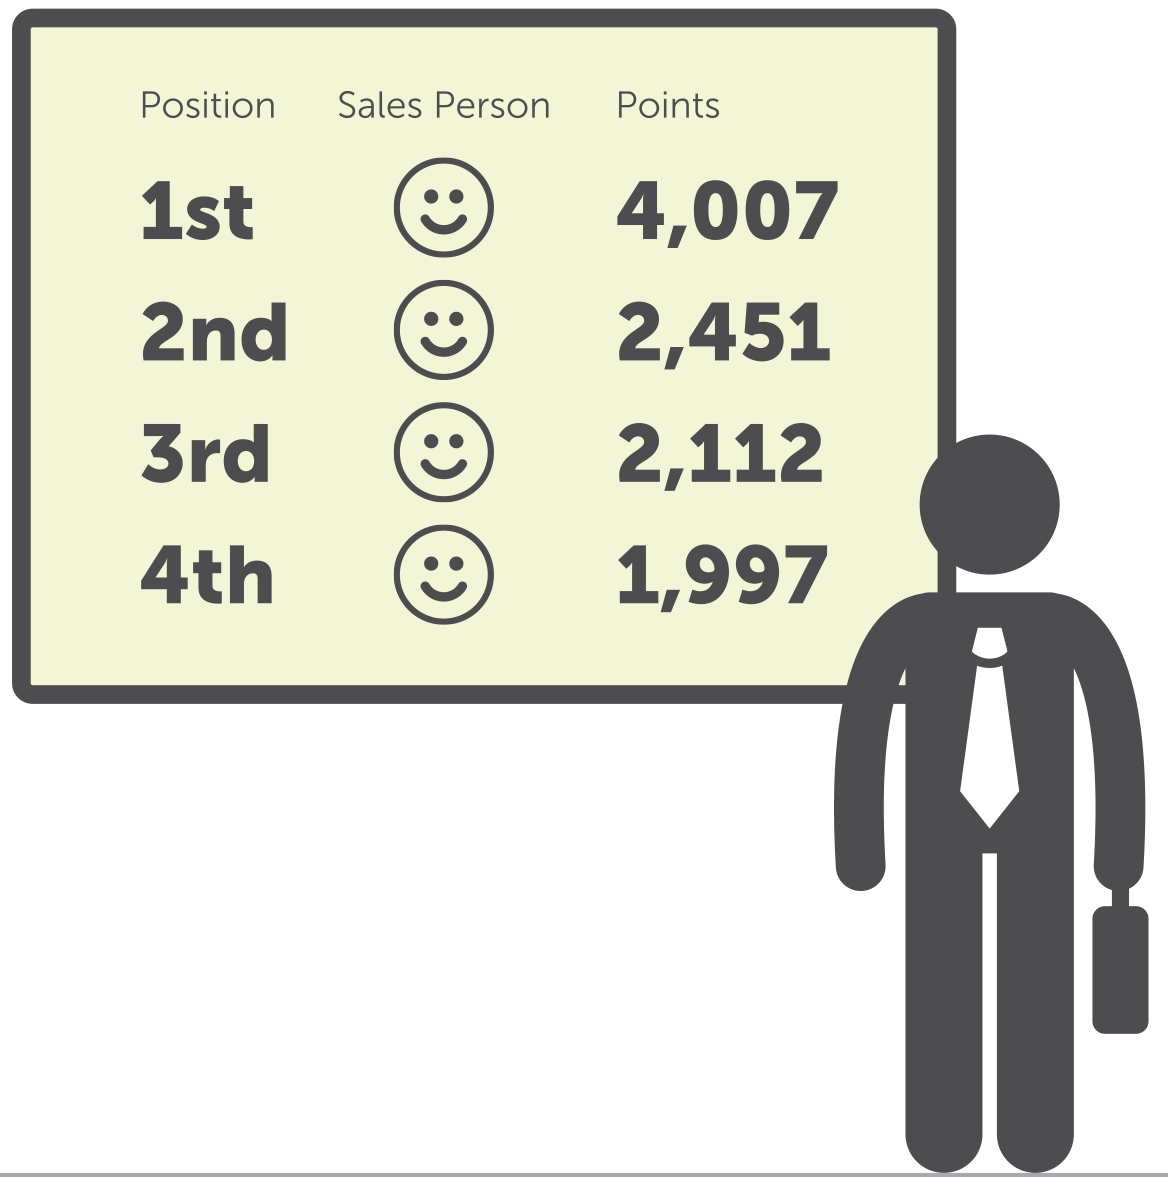 5 Reasons We Love Sales Leaderboards (And You Should, Too!)